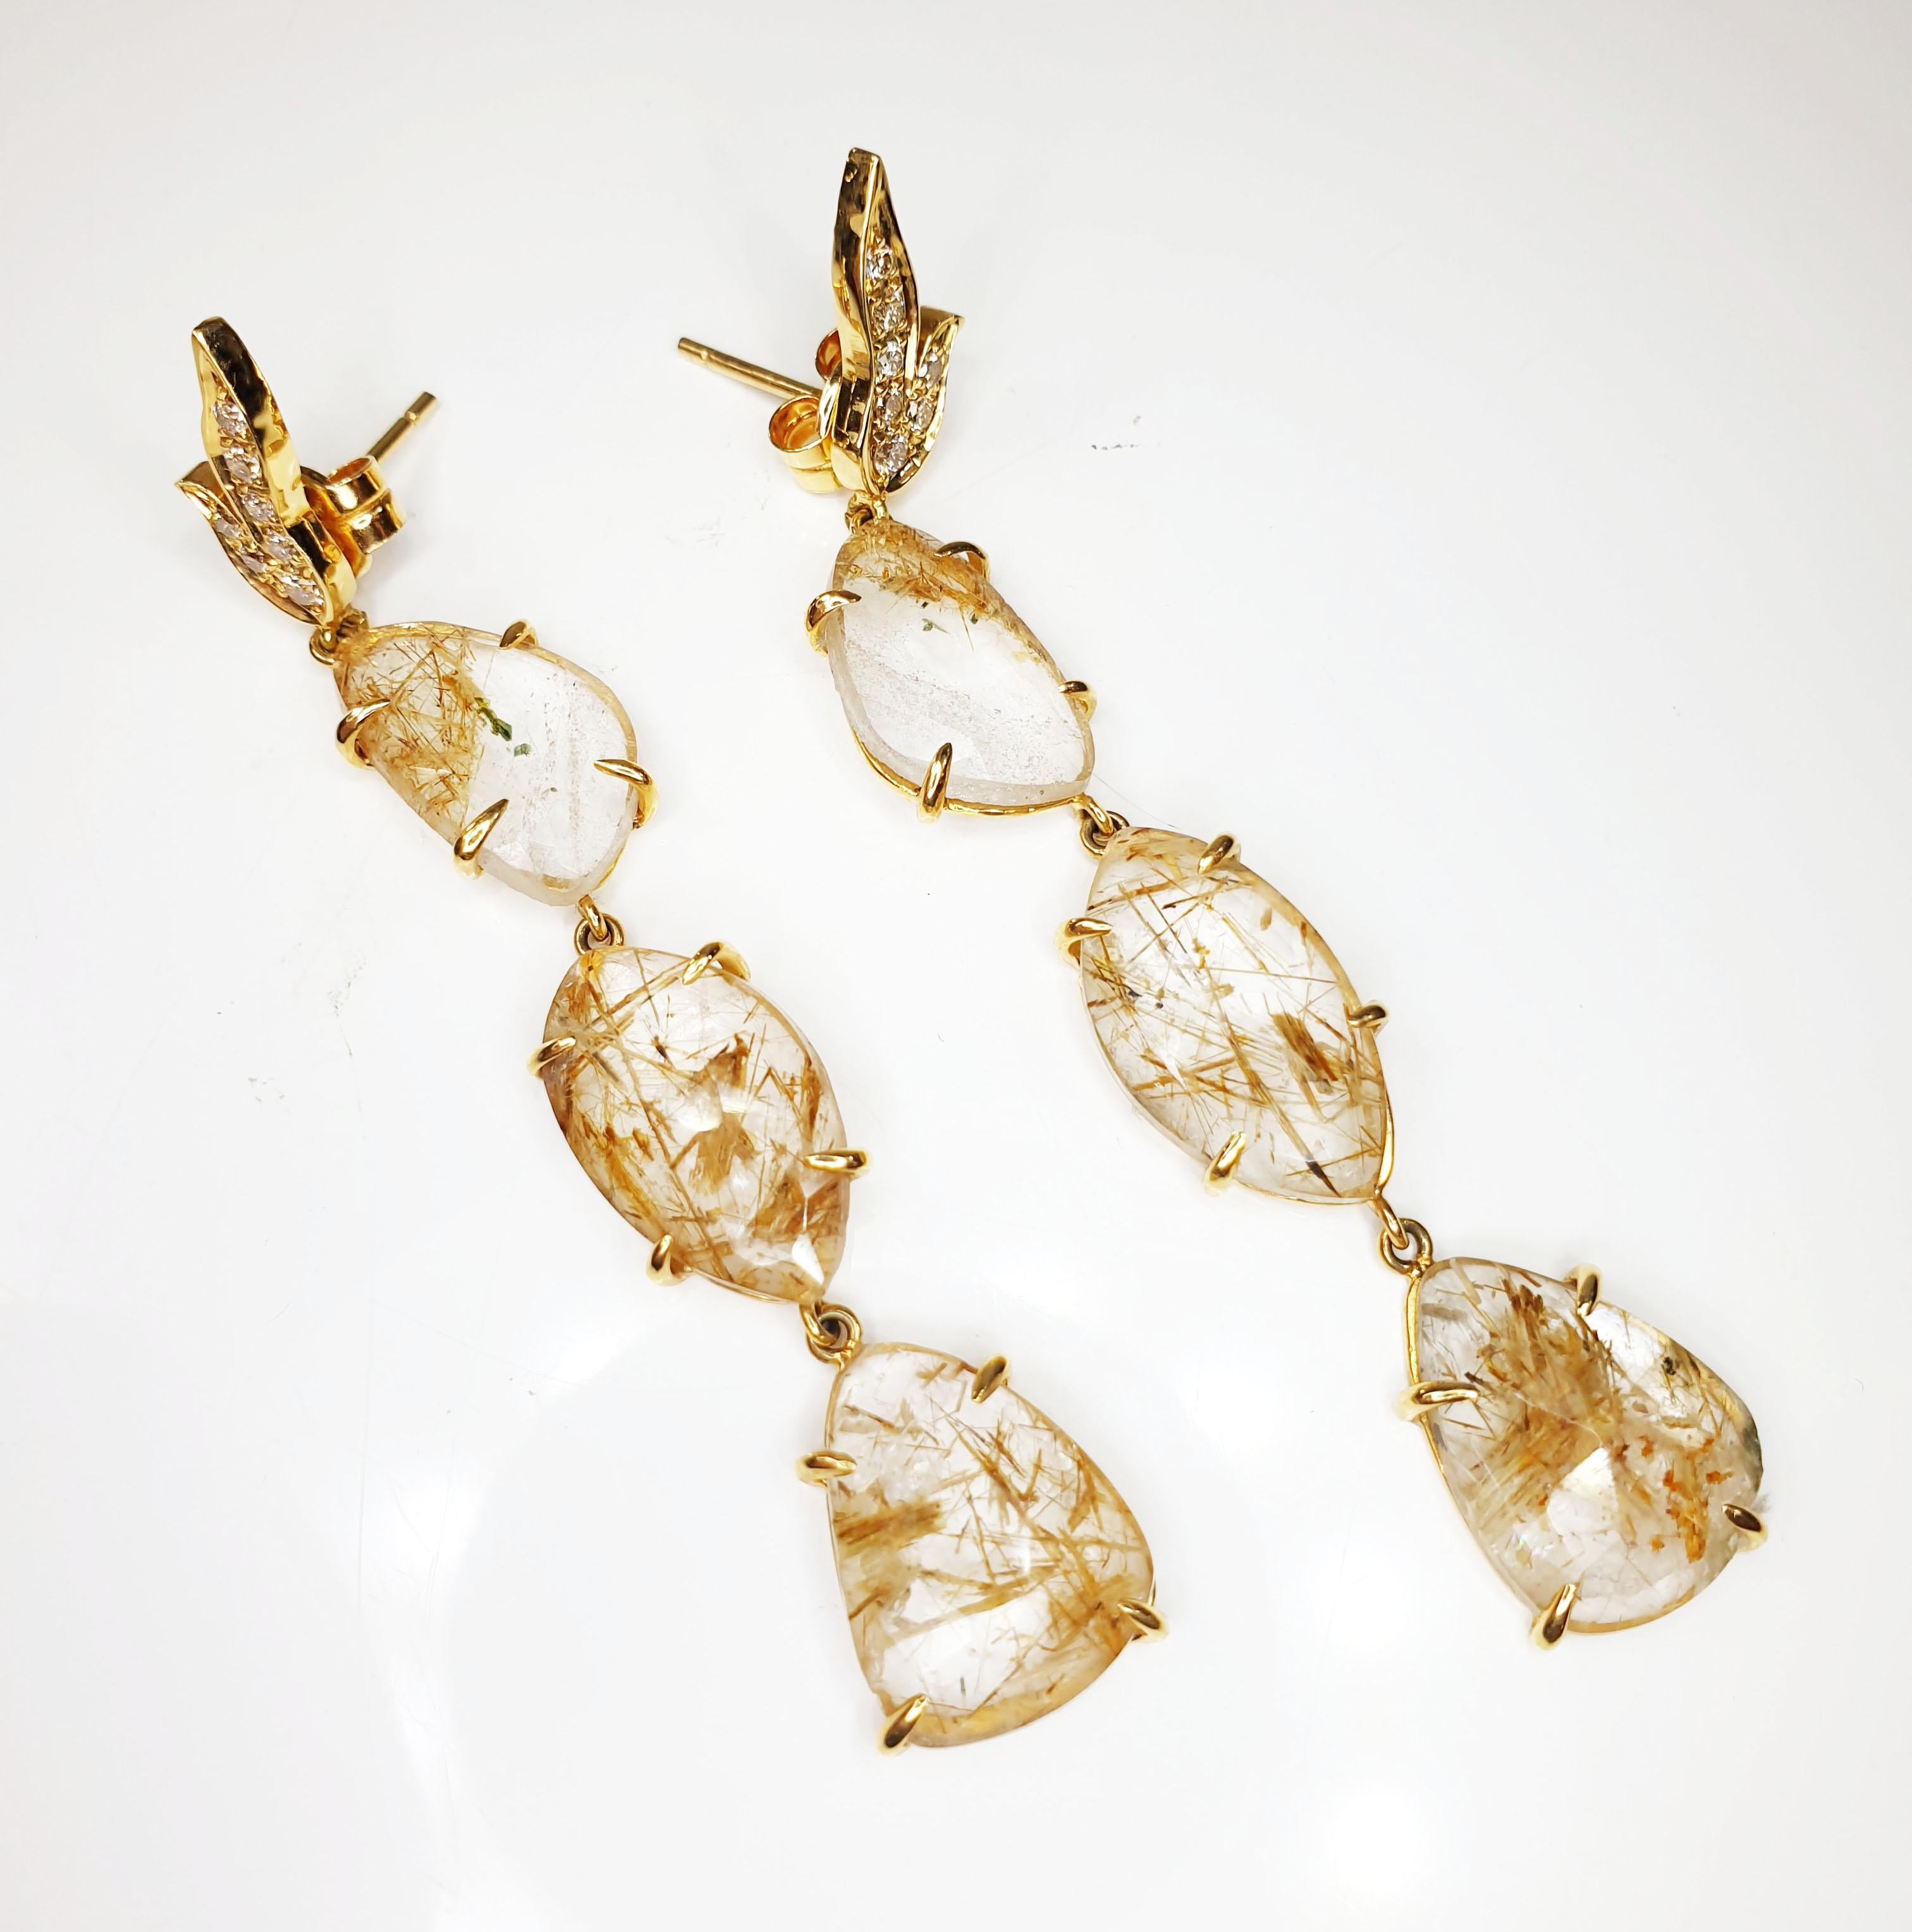 Rutiles leafs in 18k yellow gold and pavé of diamonds drop earrings 
Irama Pradera is a Young designer from Spain that searches always for the best gems and combines classic with contemporary mounting and styles.
Rutile, often referred throughout